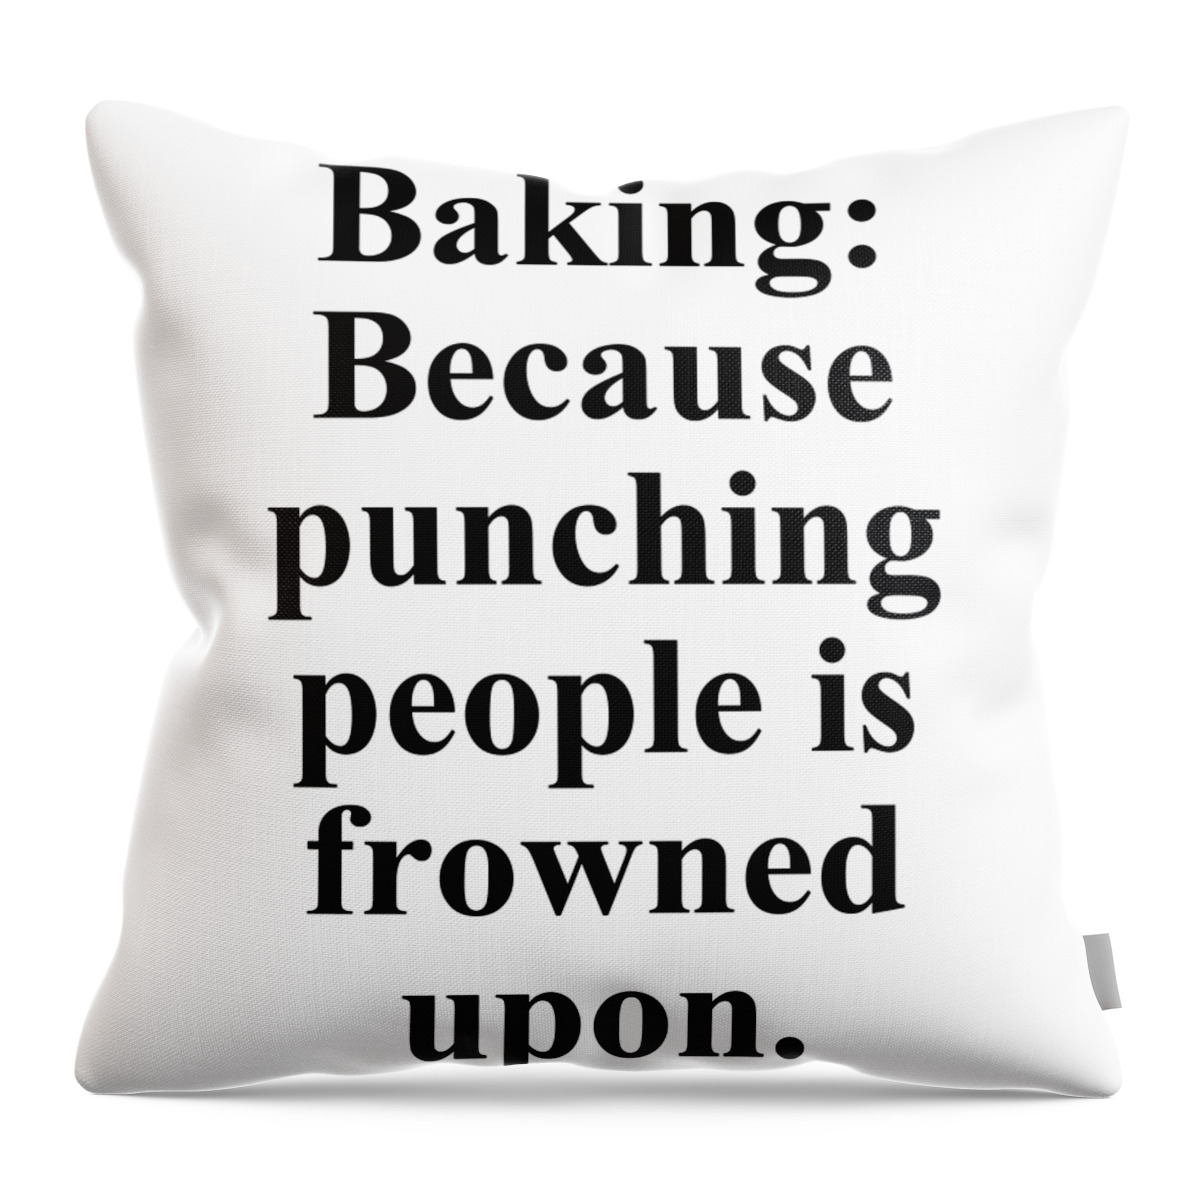 Baker Throw Pillow featuring the digital art Baking Because punching people is frowned upon. by Jeff Creation